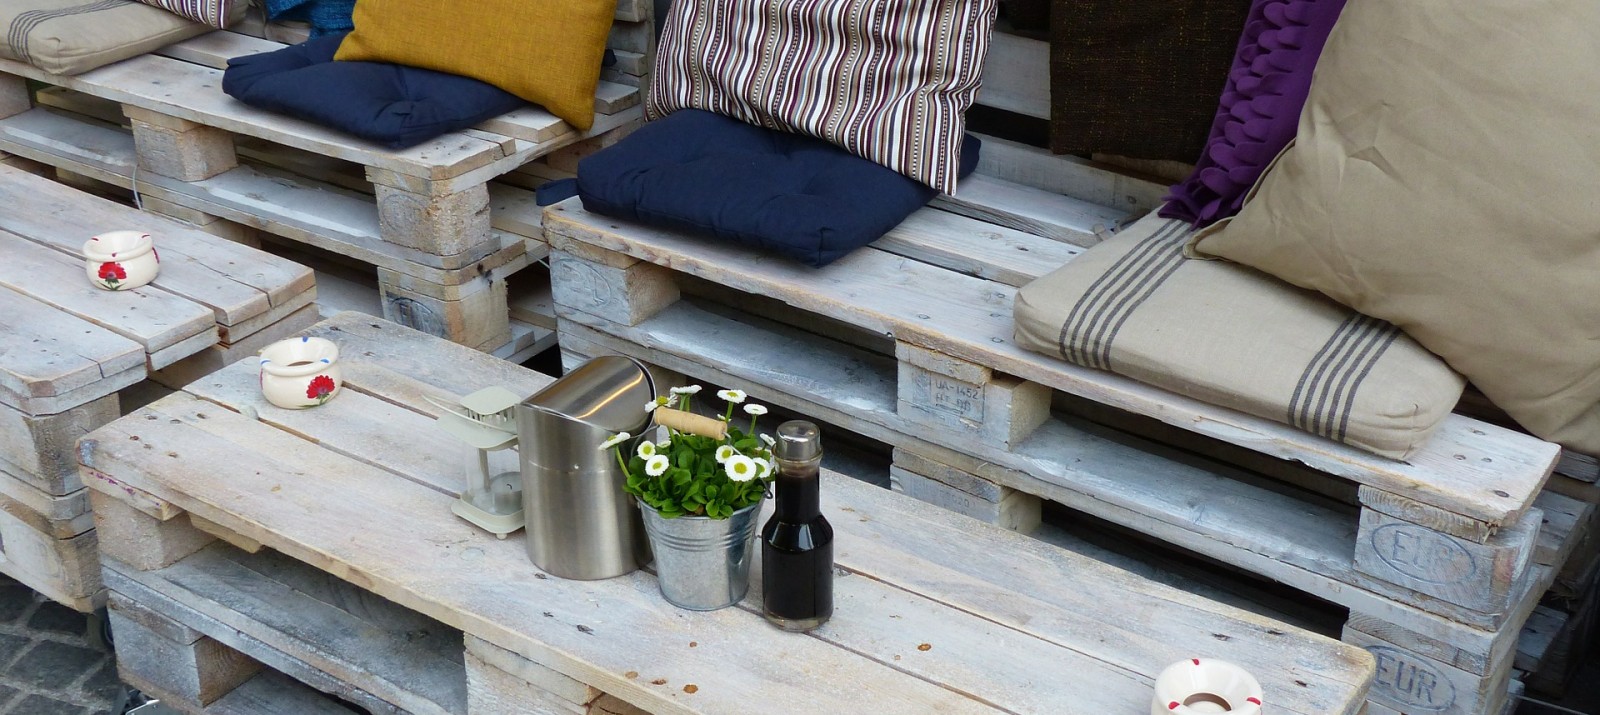 DIY wood pallet patio furniture with colorful cushions and storage space.